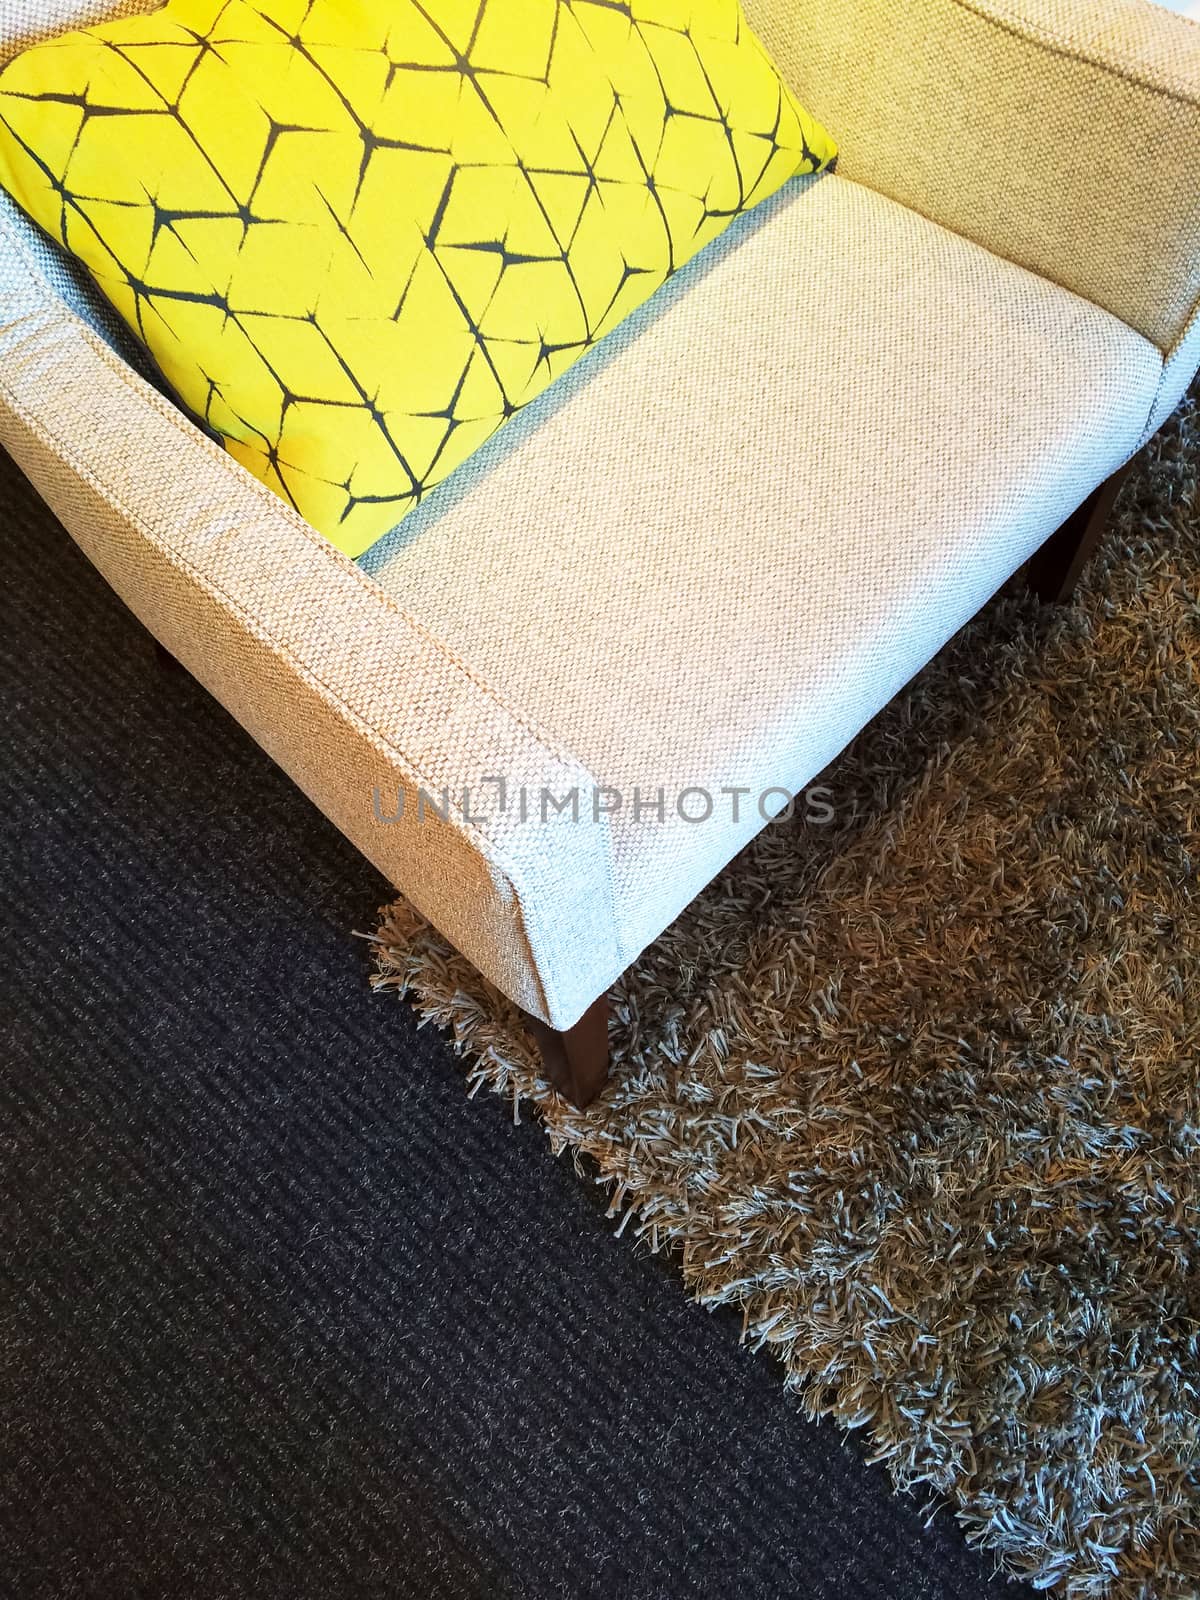 Armchair on a fluffy carpet, decorated with yellow cushion.